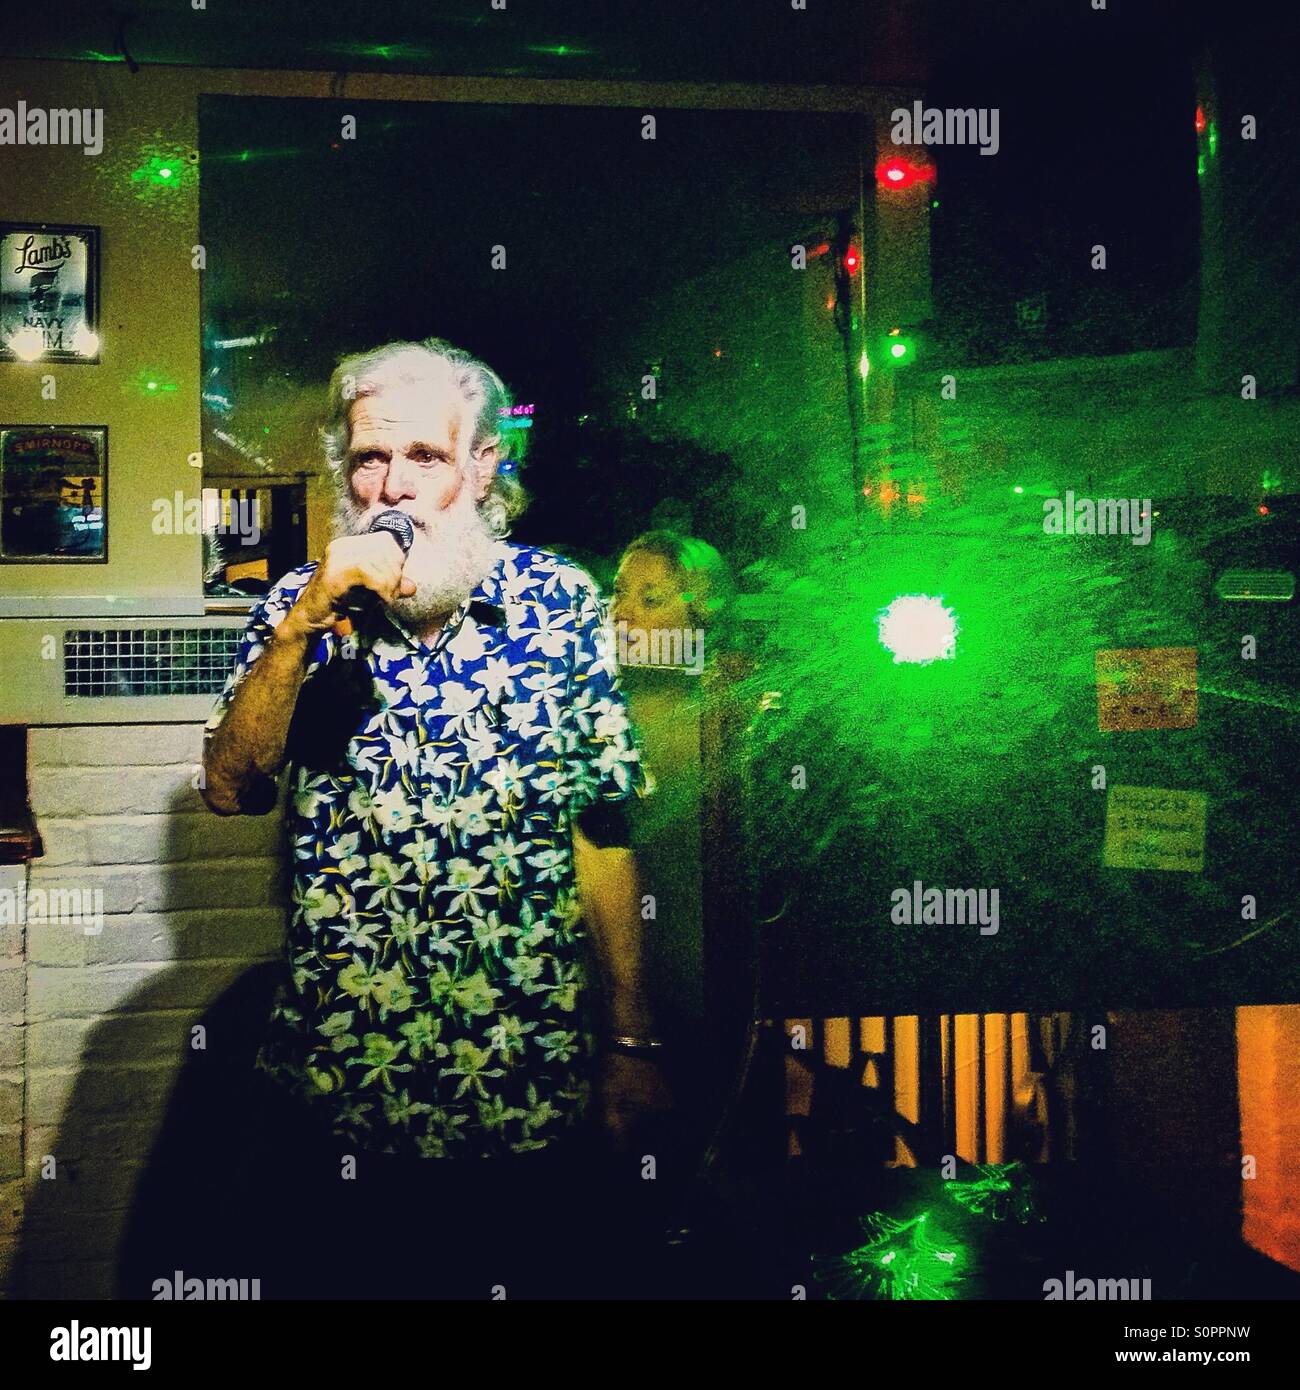 An Old Karaoke Performer In Small British Pub Stock Photo